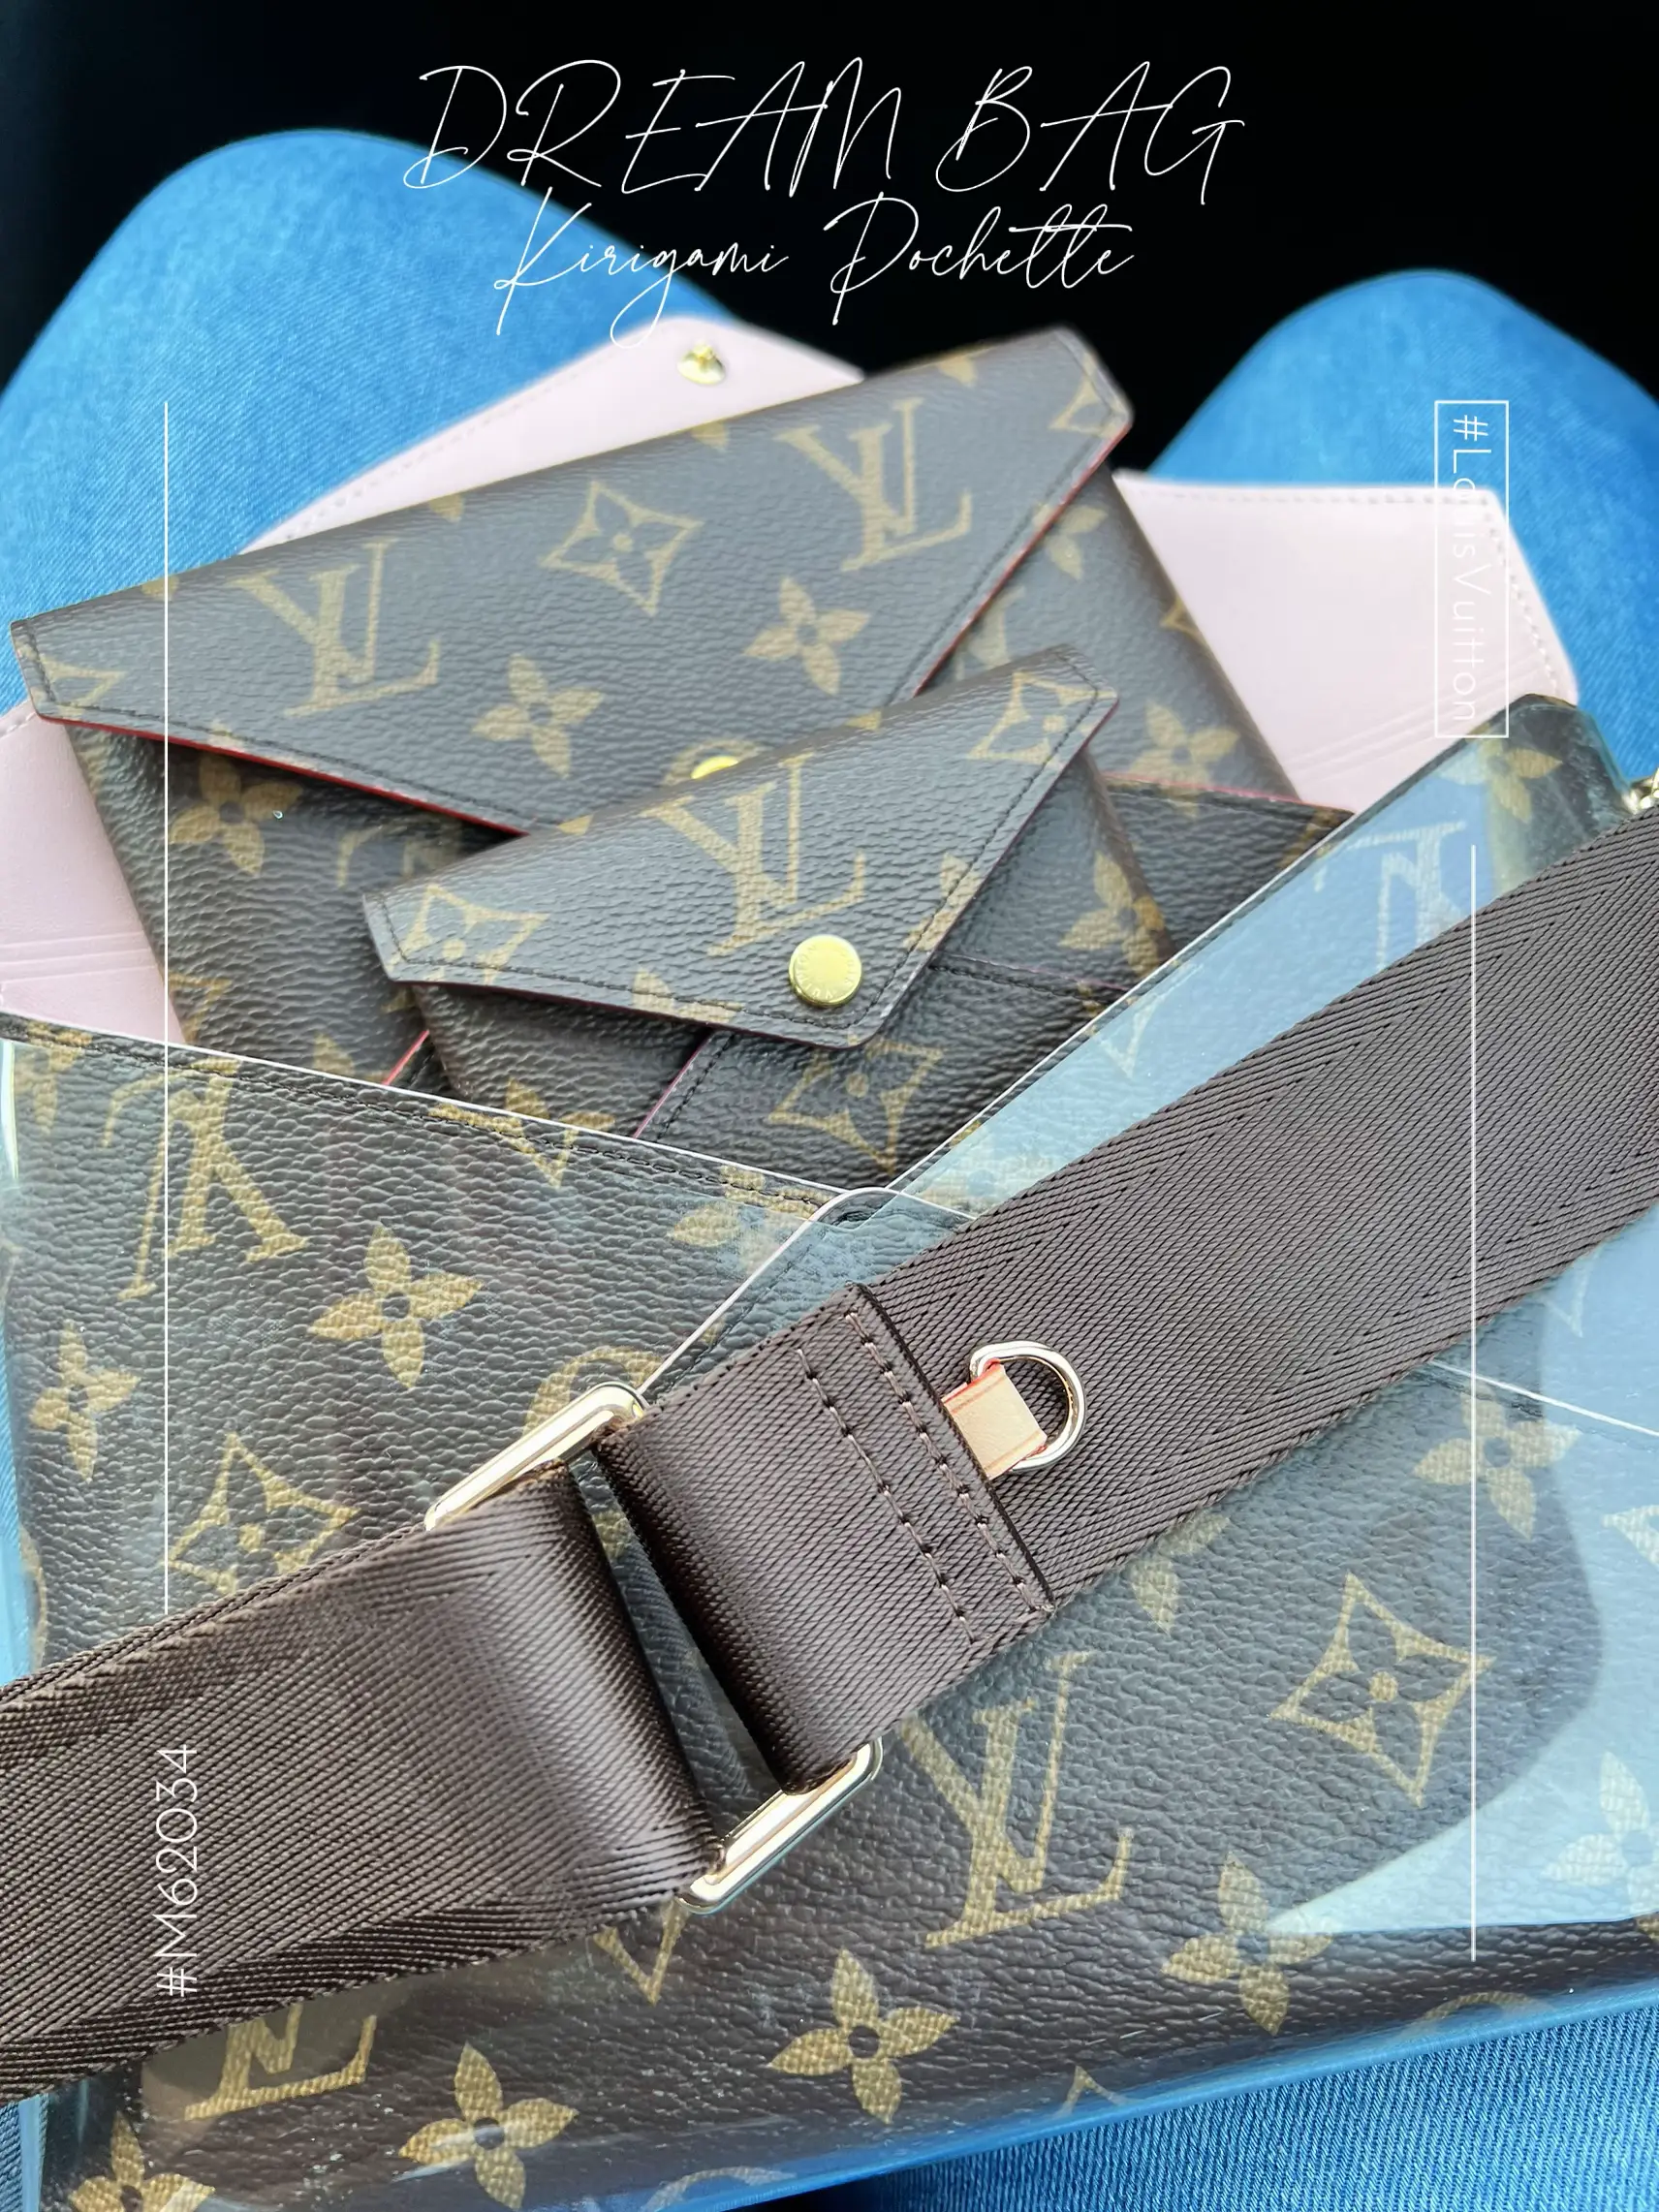 Why I bought the Louis Vuitton Kirigami Set + What fits inside? 